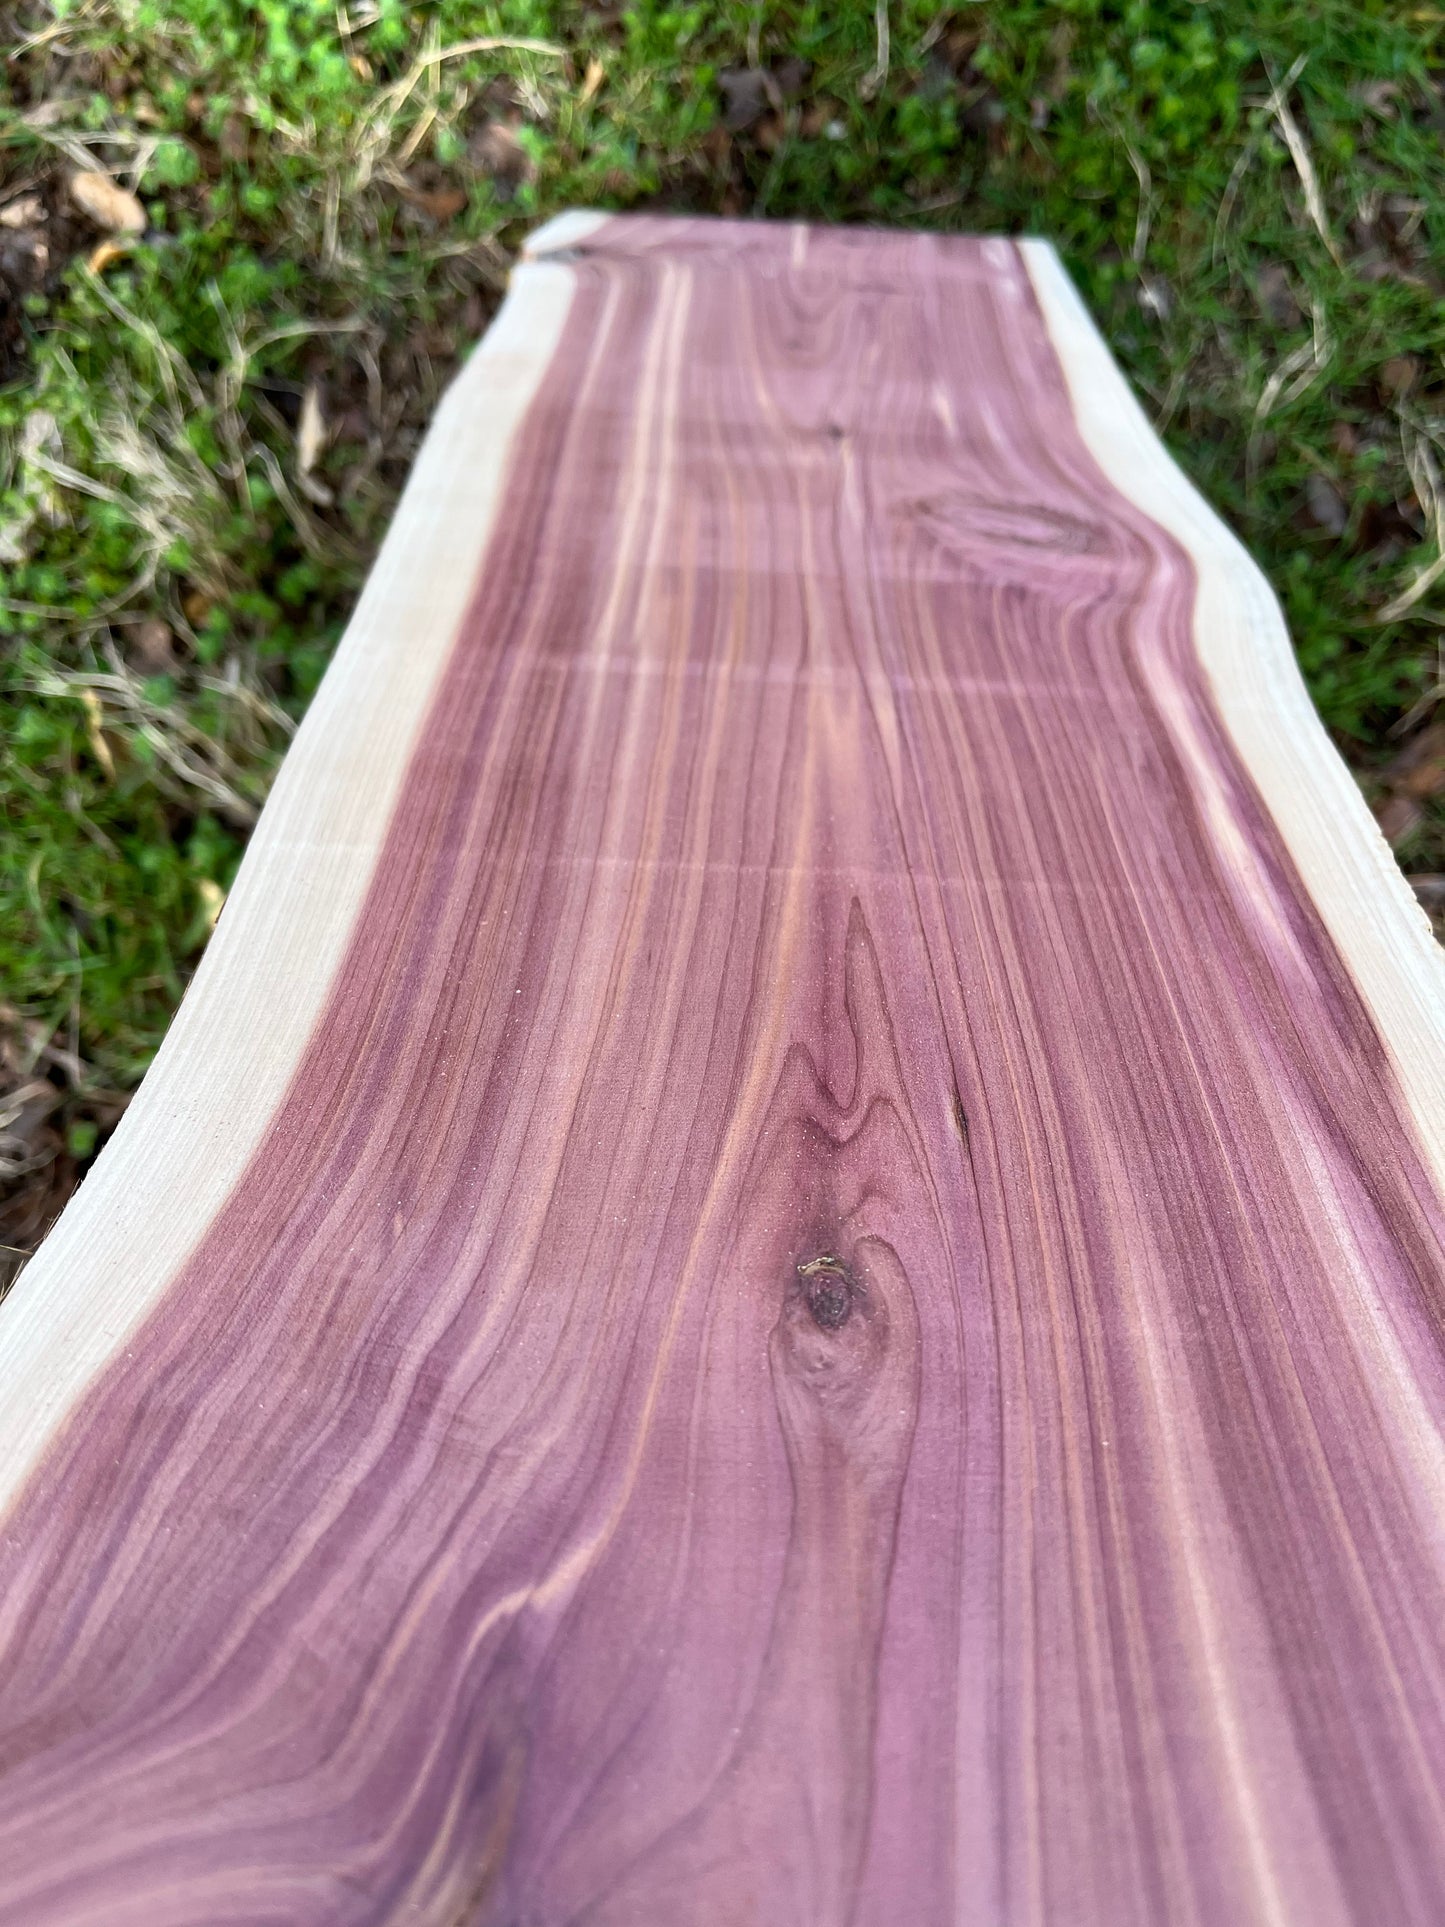 2" Thick Planed Eastern Red Cedar Live Edge Slabs for Charcuterie Boards, Furniture, Table and Bar Tops, Shelves, and More - Kiln Dried